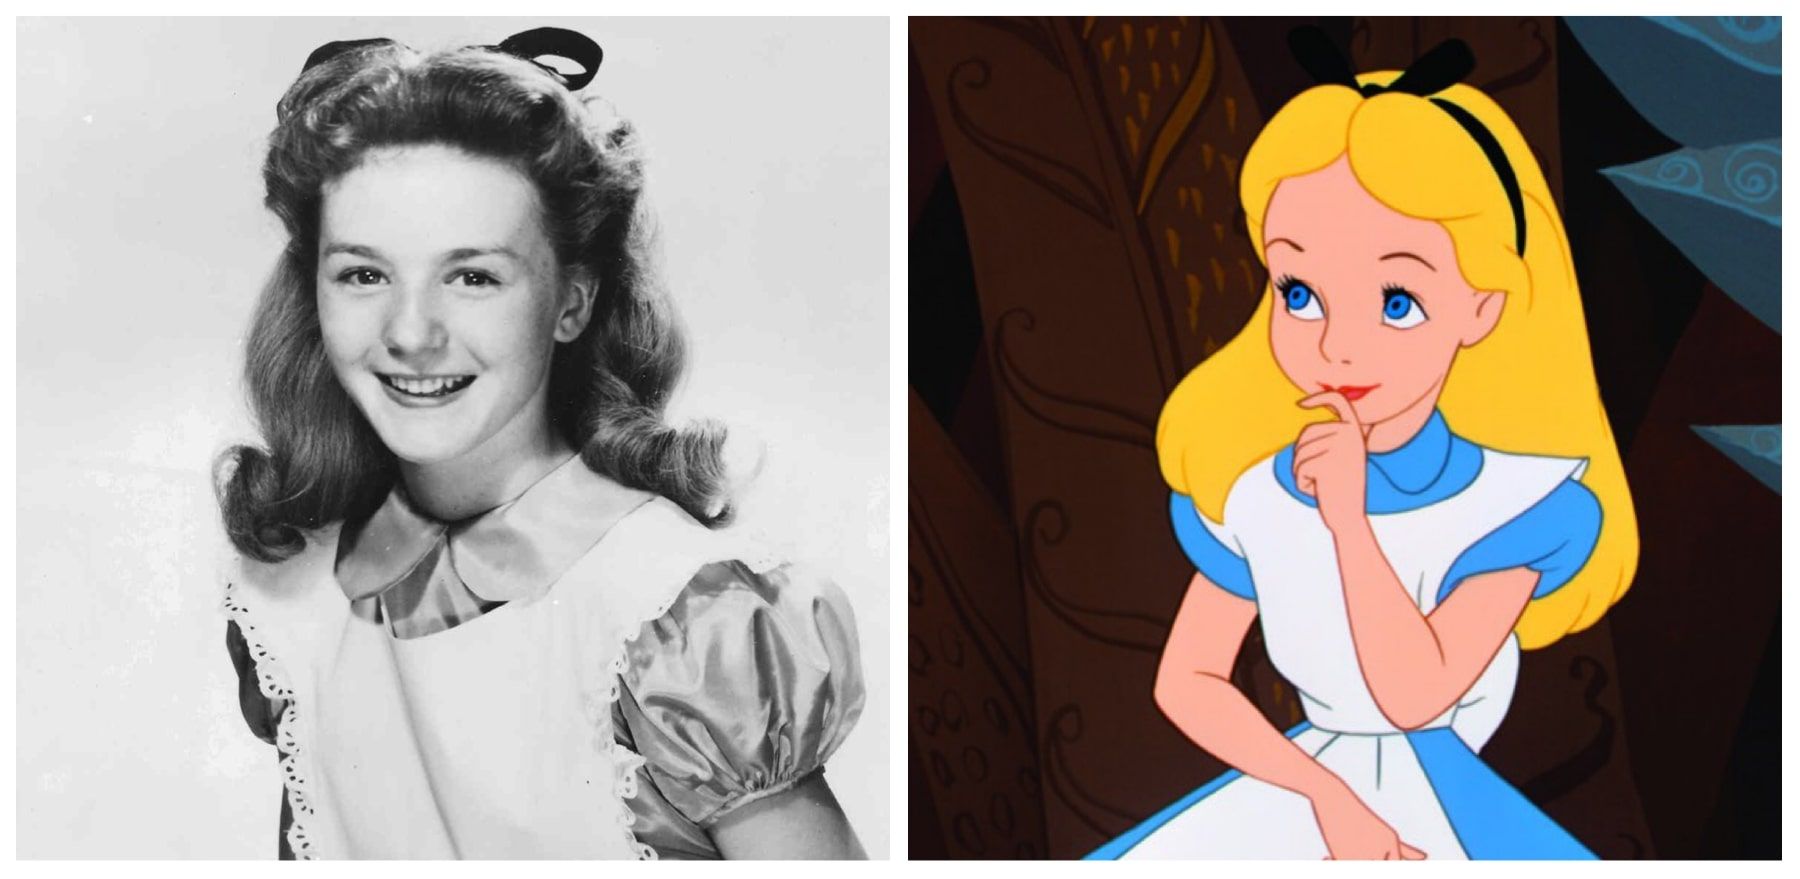 25 Disney And DreamWorks Voice Actors That Look (Almost) Exactly Like Their Characters